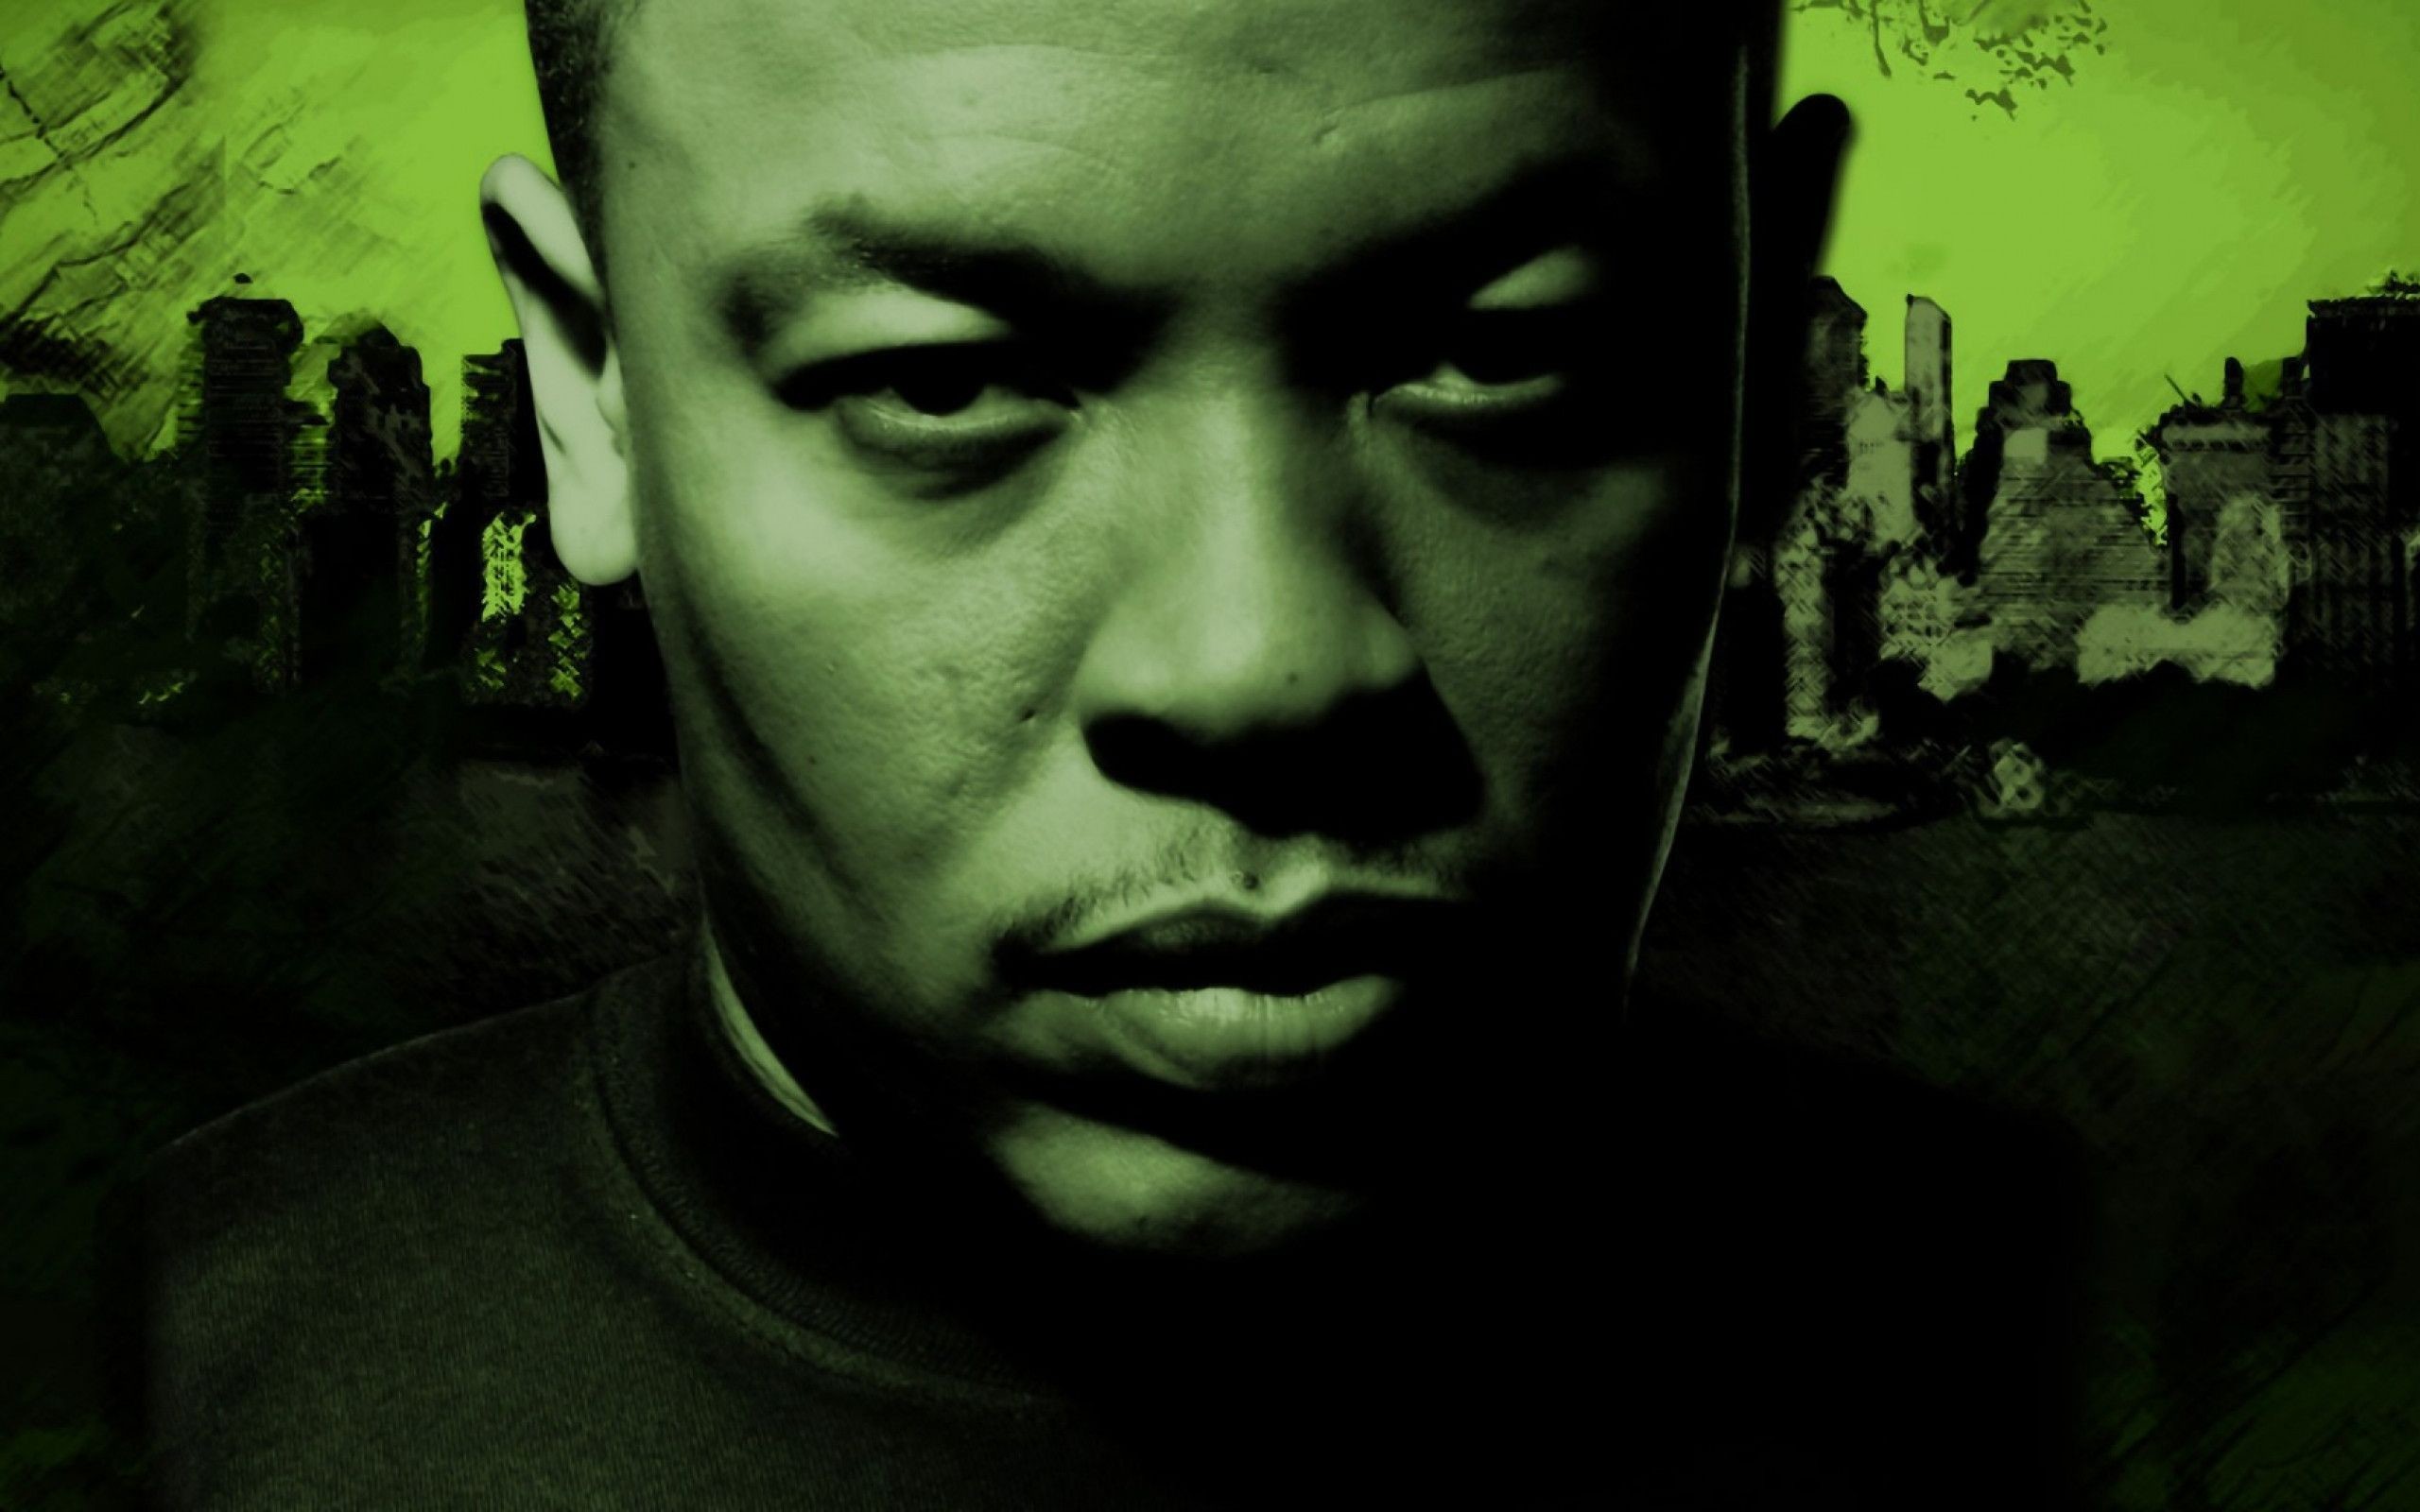 2560x1600 ... 18 dr dre wallpapers in high quality wallinsider com ...